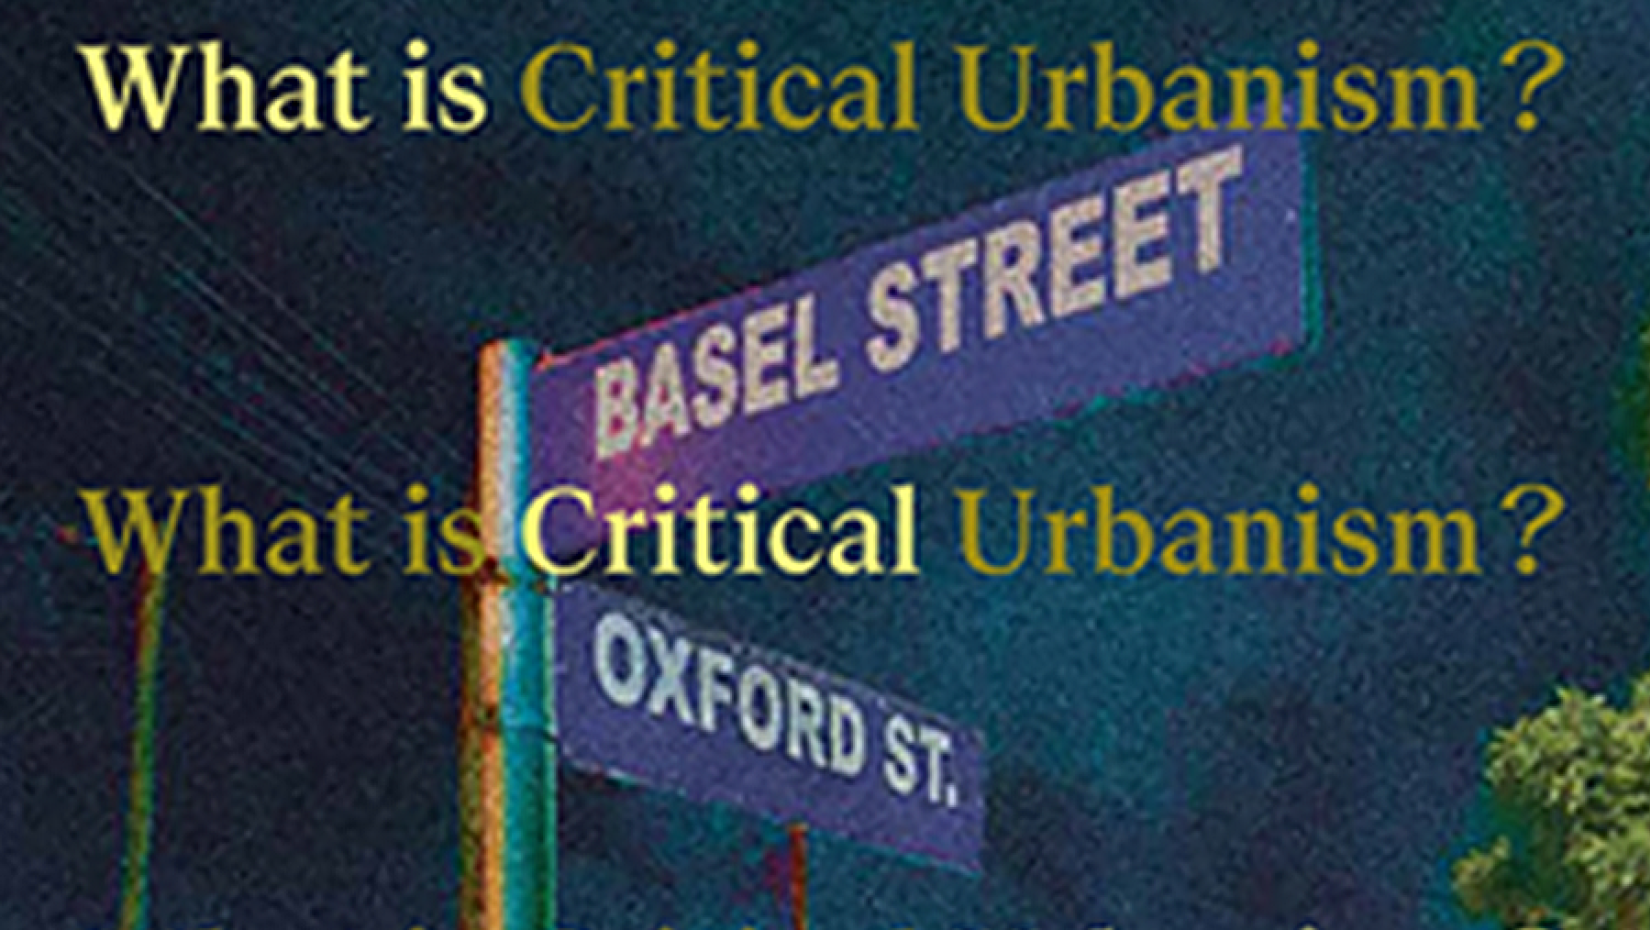 Street signs reading Basil Street and Oxford St. with book title overlaid